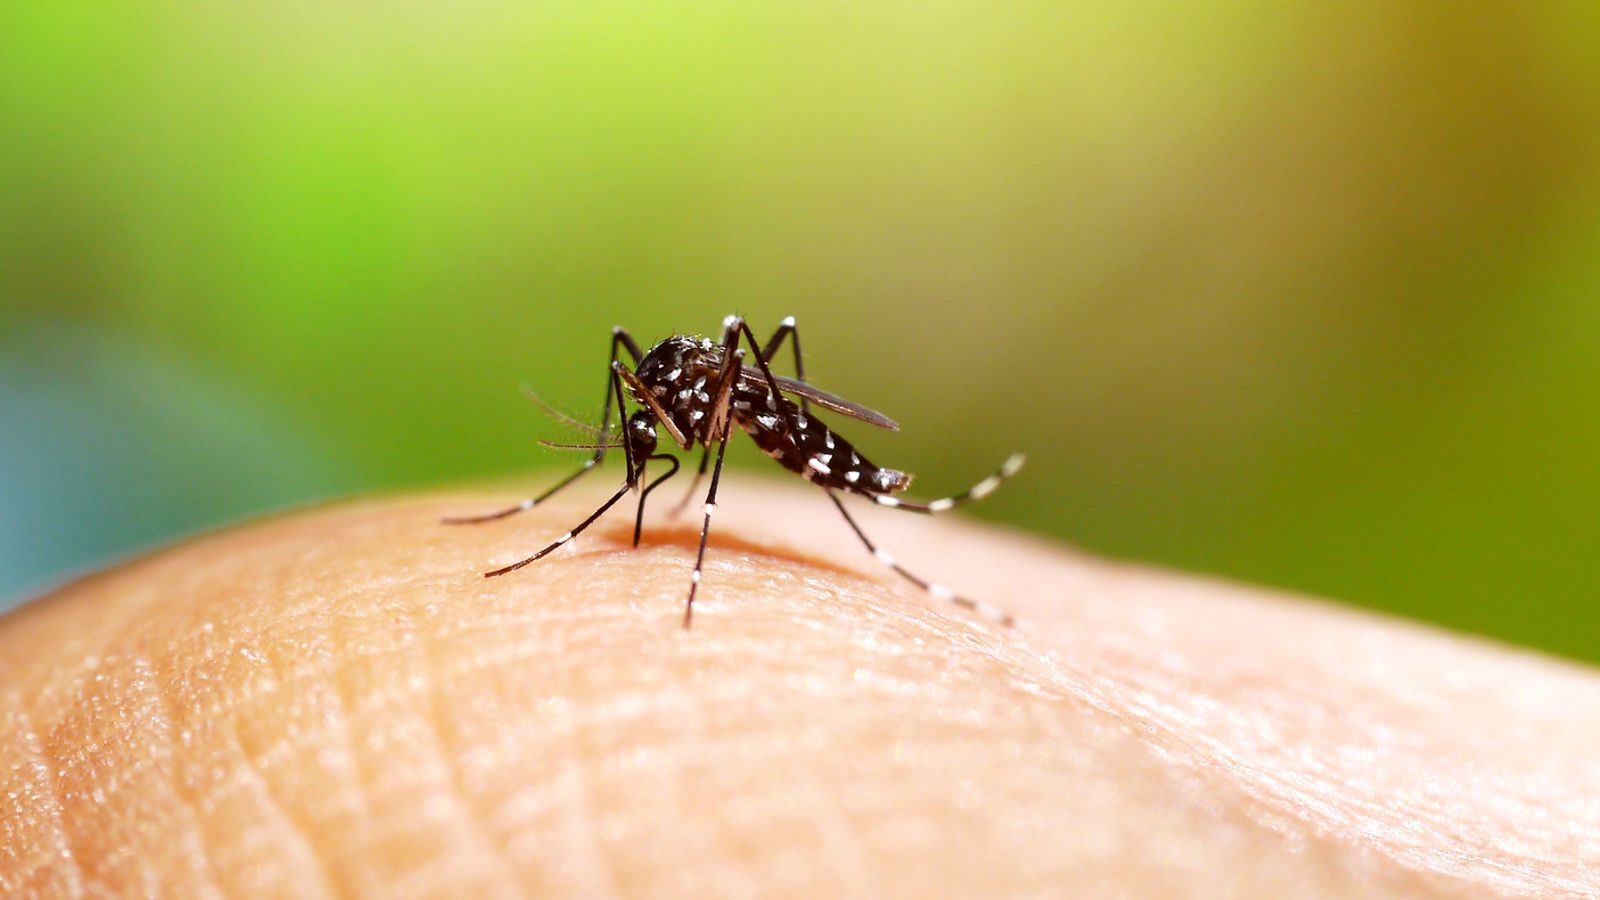 Mosquitoes carrying dengue fever could be common in England by the 2040s, govt experts warn